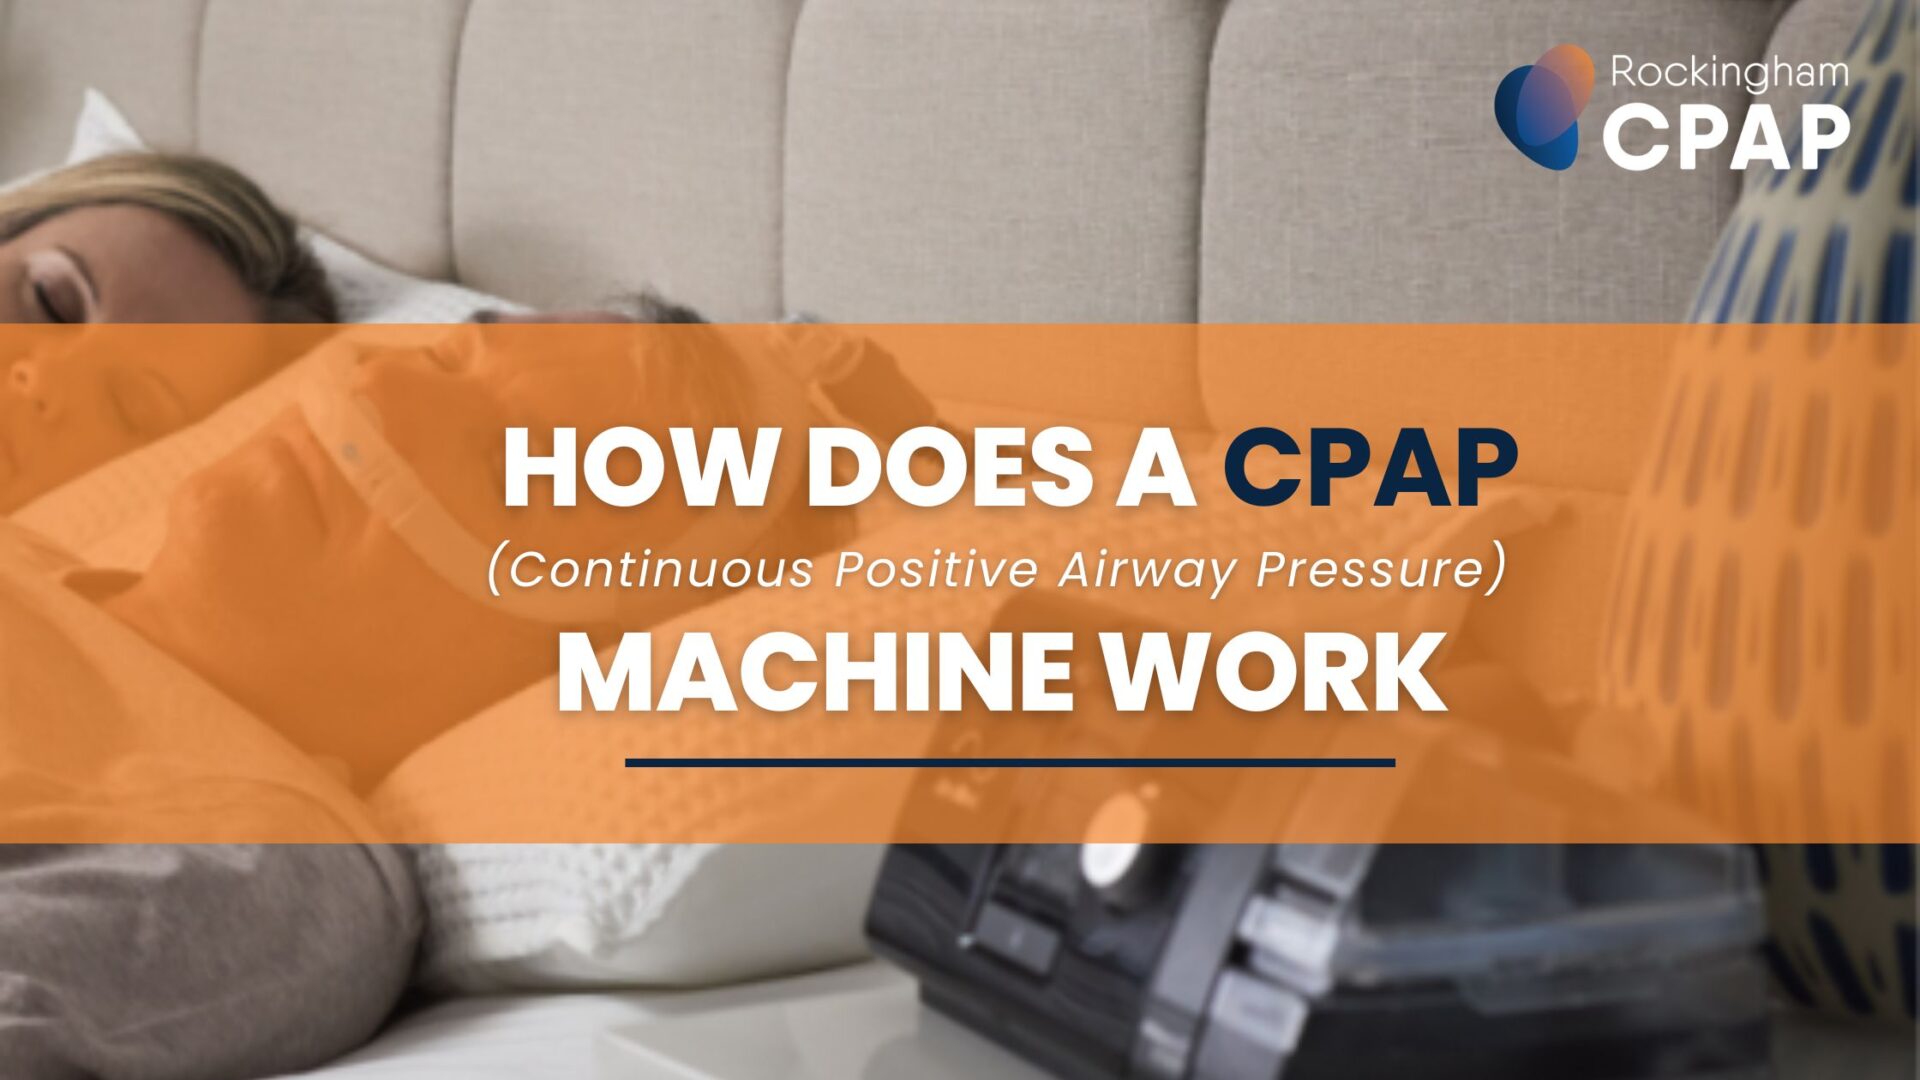 How Does a CPAP (Continuous Positive Airway Pressure) Machine Work